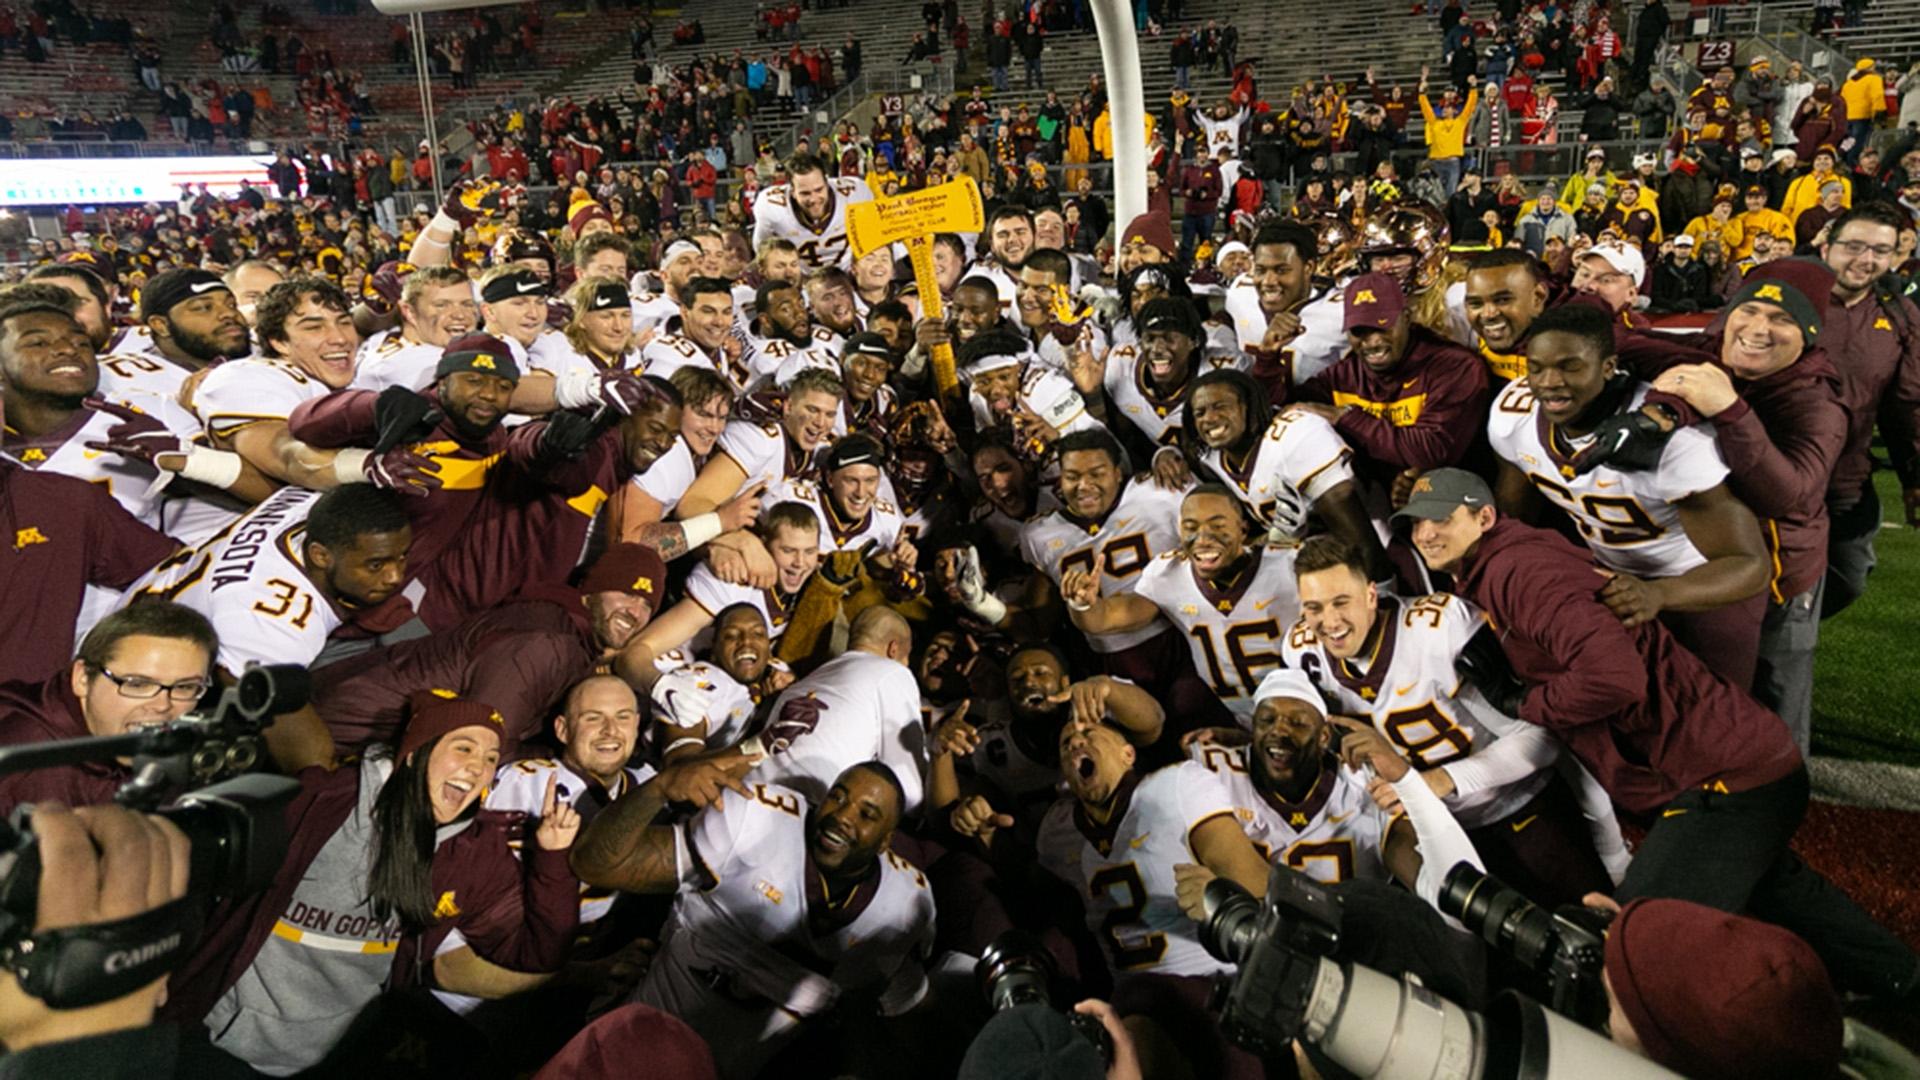 Minnesota took the win after 13 years of the axe staying in Madison.